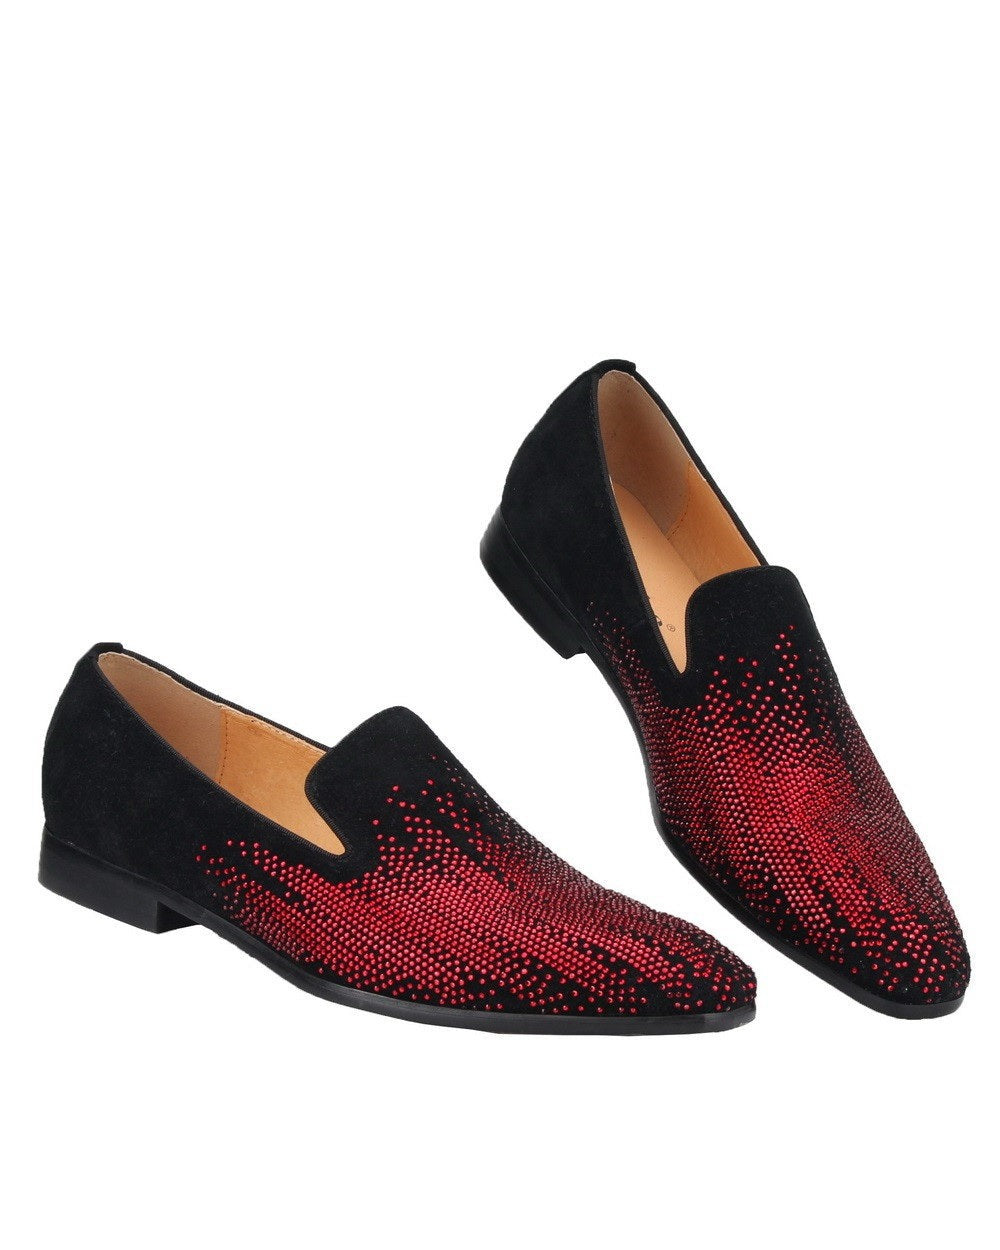 Rhinestone Men Red LoafersMoccasins Flats Dress Shoes